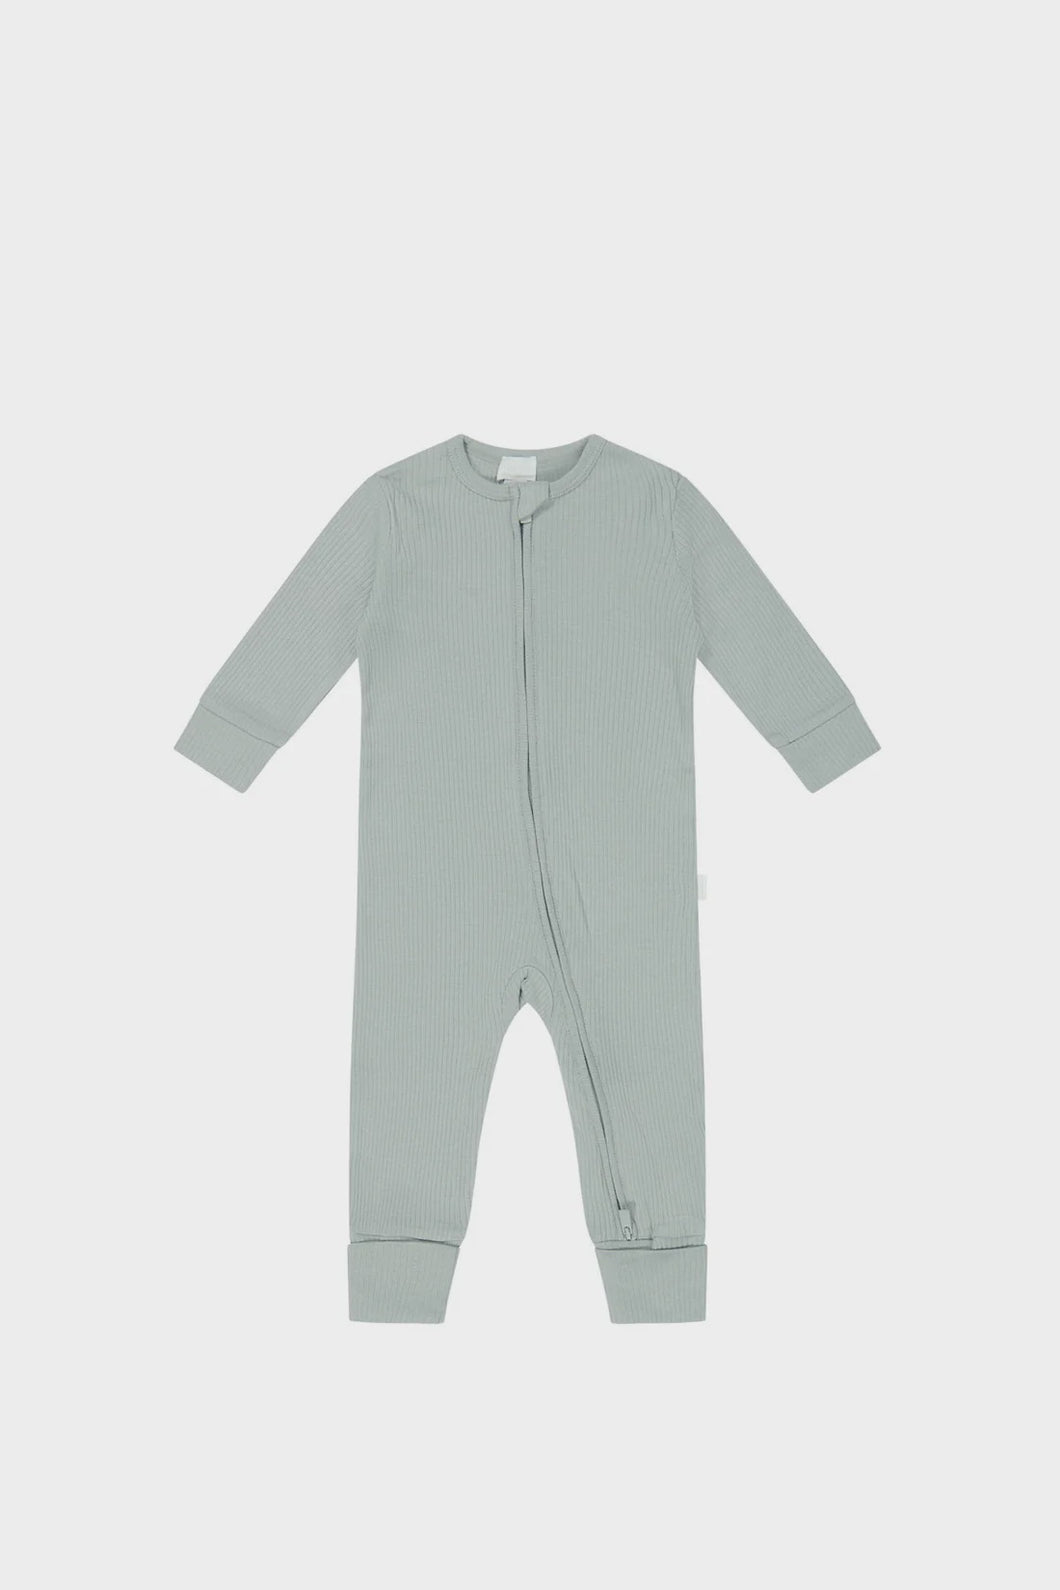 Jamie Kay Organic Cotton Modal Frankie Onepiece - Mineral 60% Organic Cotton 40% Modal This gorgeous blend is the perfect combination of soft, lightweight, and stretchy for your baby. Rosies Gifts, Mosgiel, Dunedin.